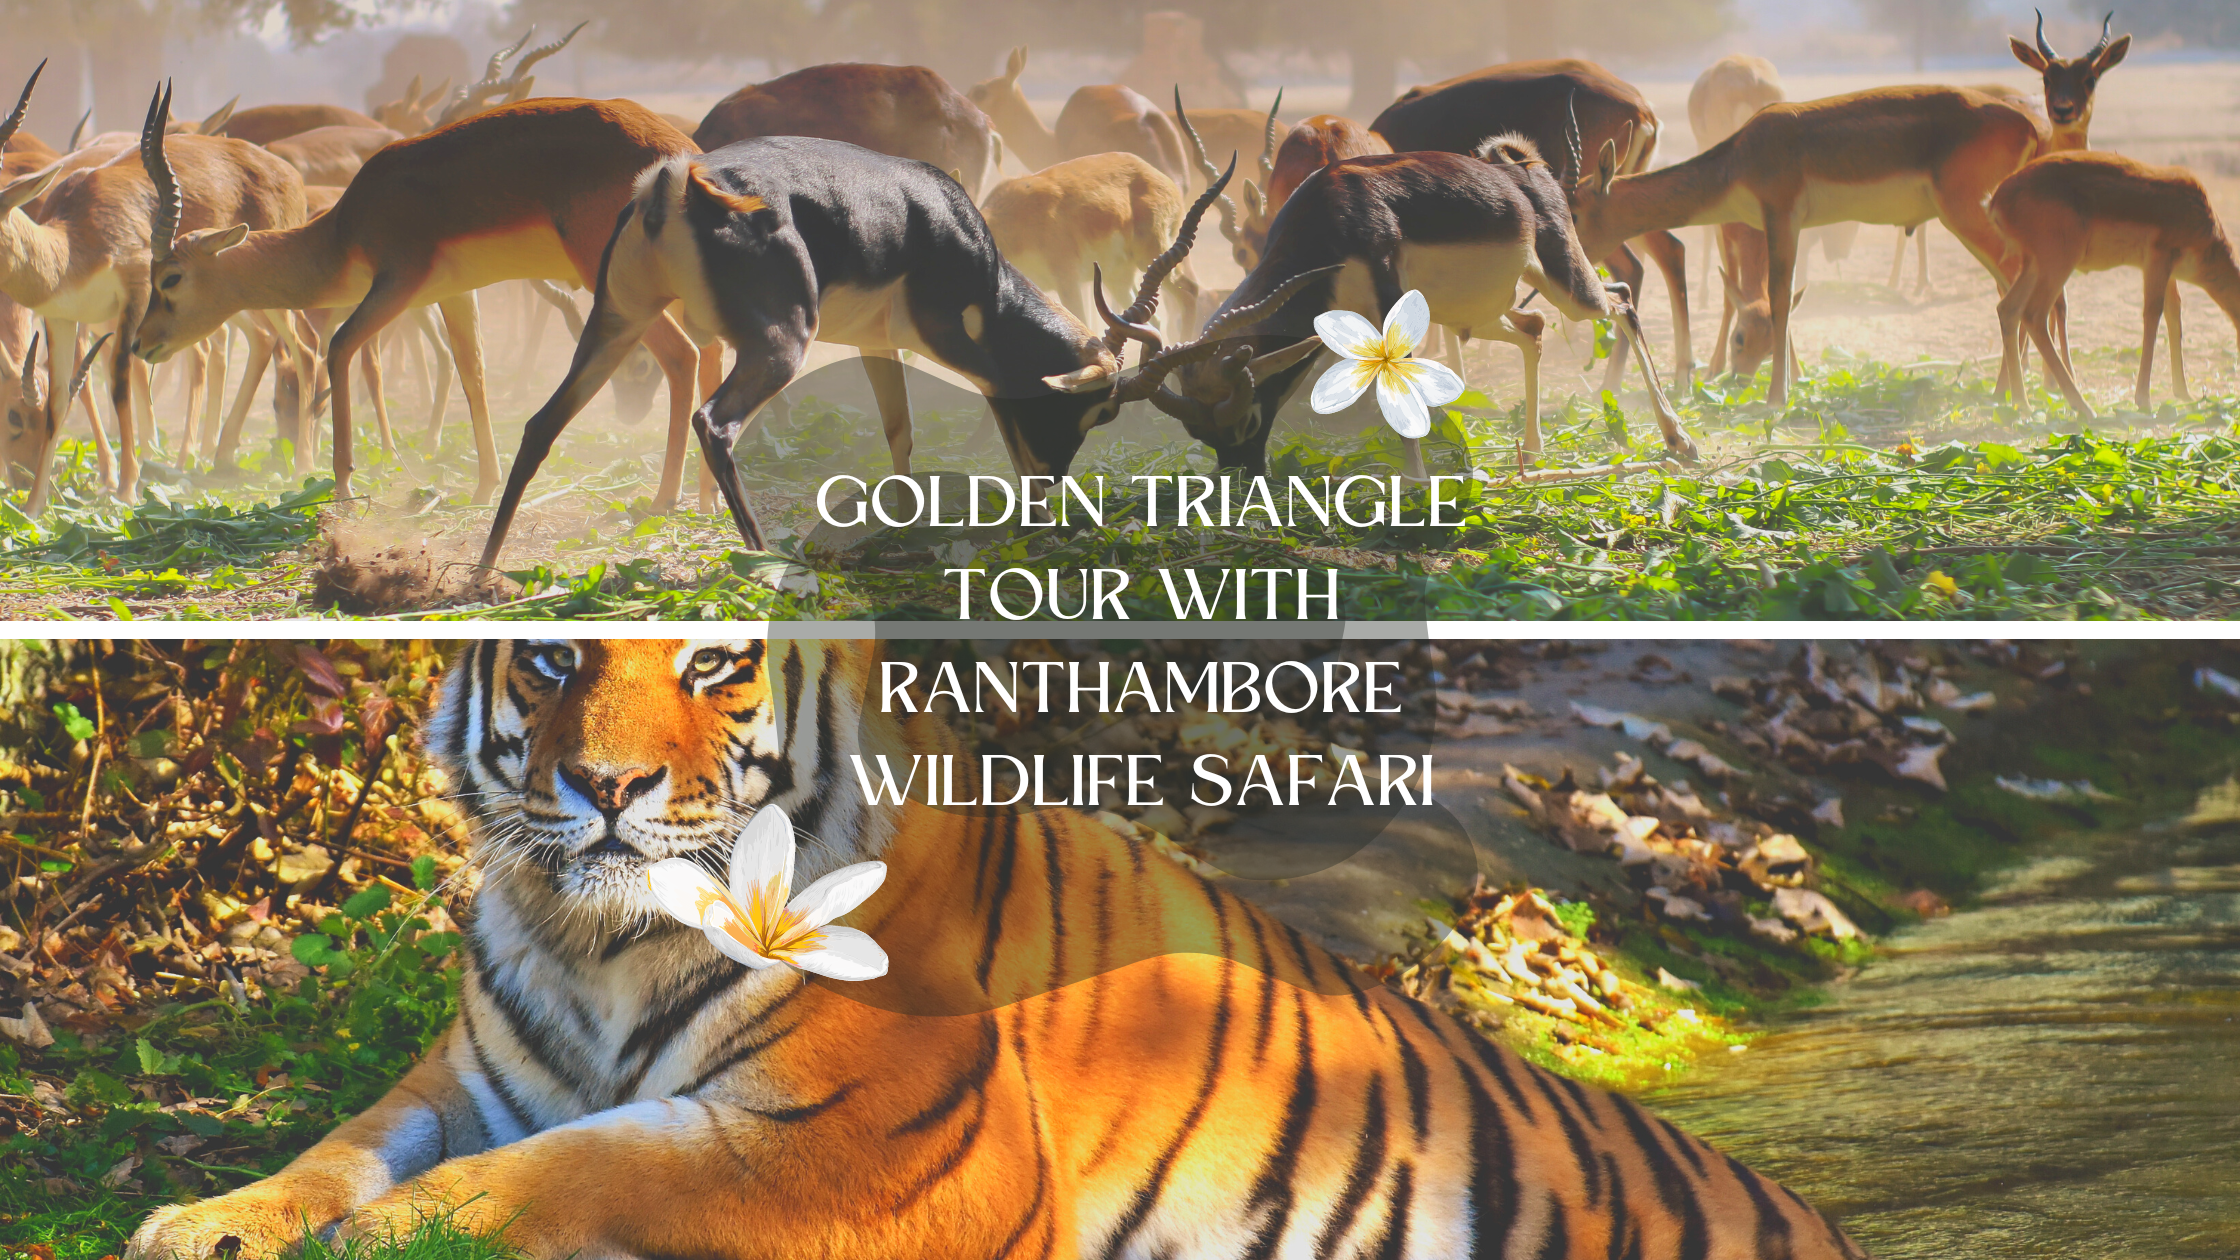 Experience India’s Most Exquisite Treasures On A Golden Triangle Tour With Ranthambore Wildlife Safari